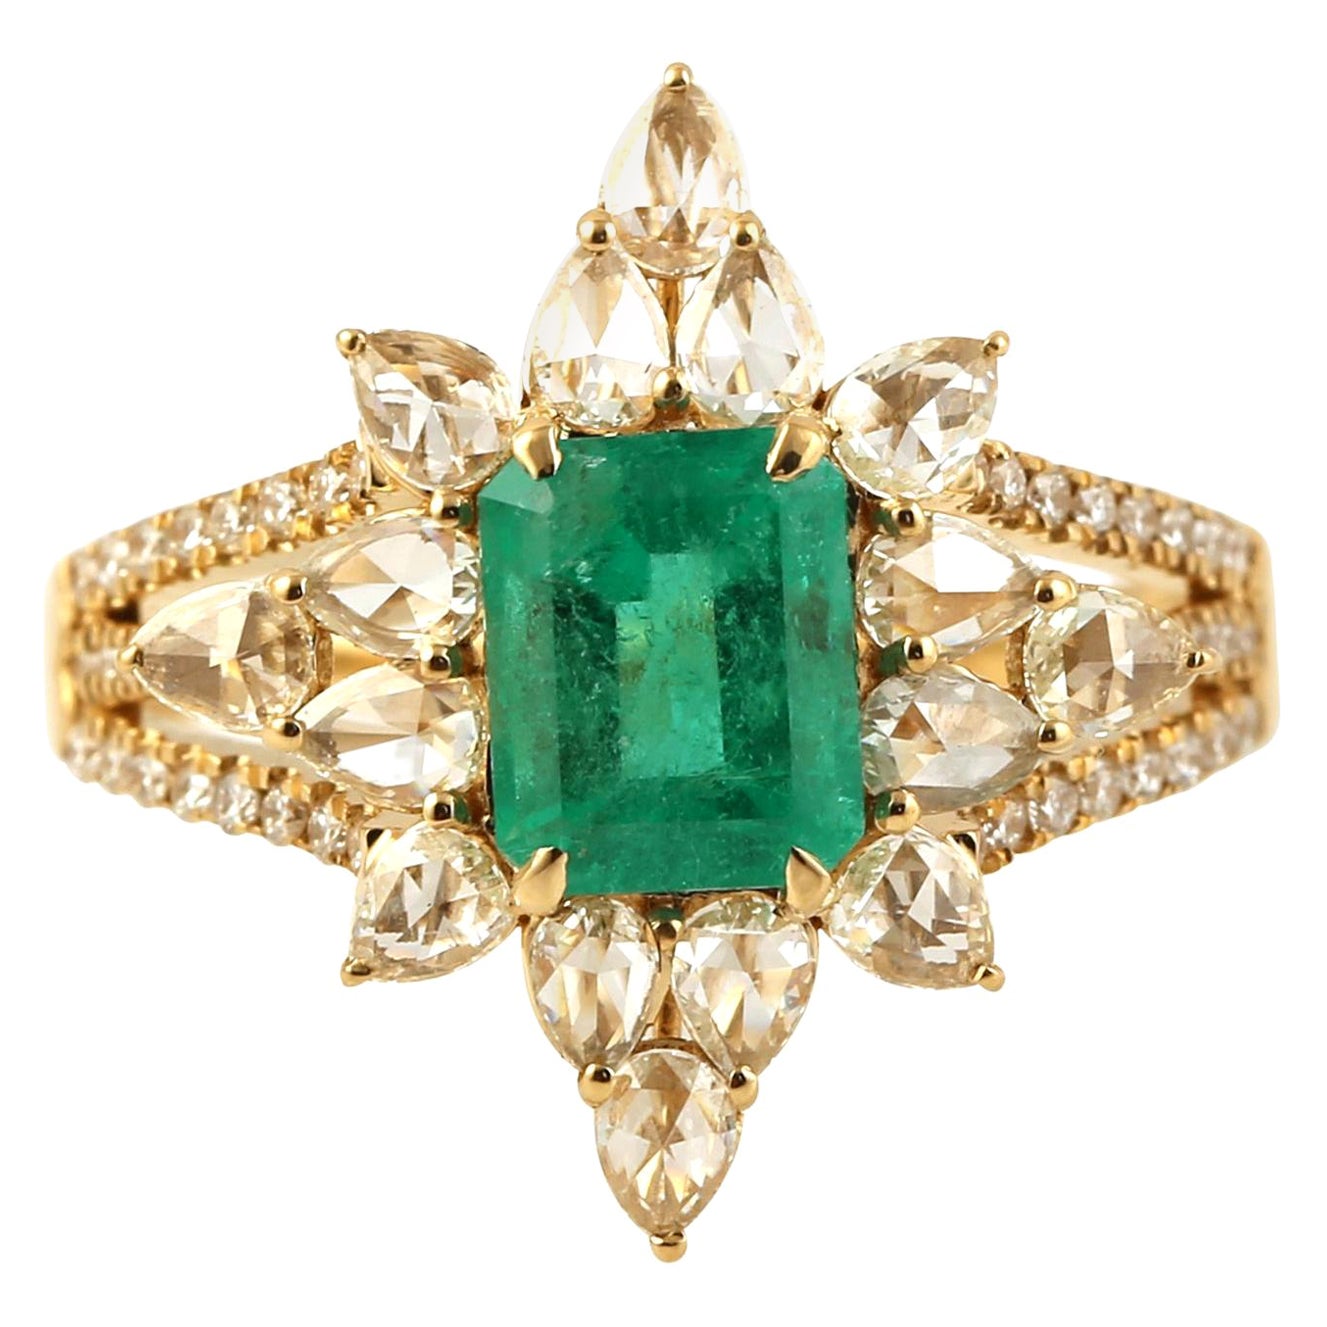 Octogen Shaped Emerald Starburst Ring With Rose Cut Diamonds In 18k Yellow Gold For Sale